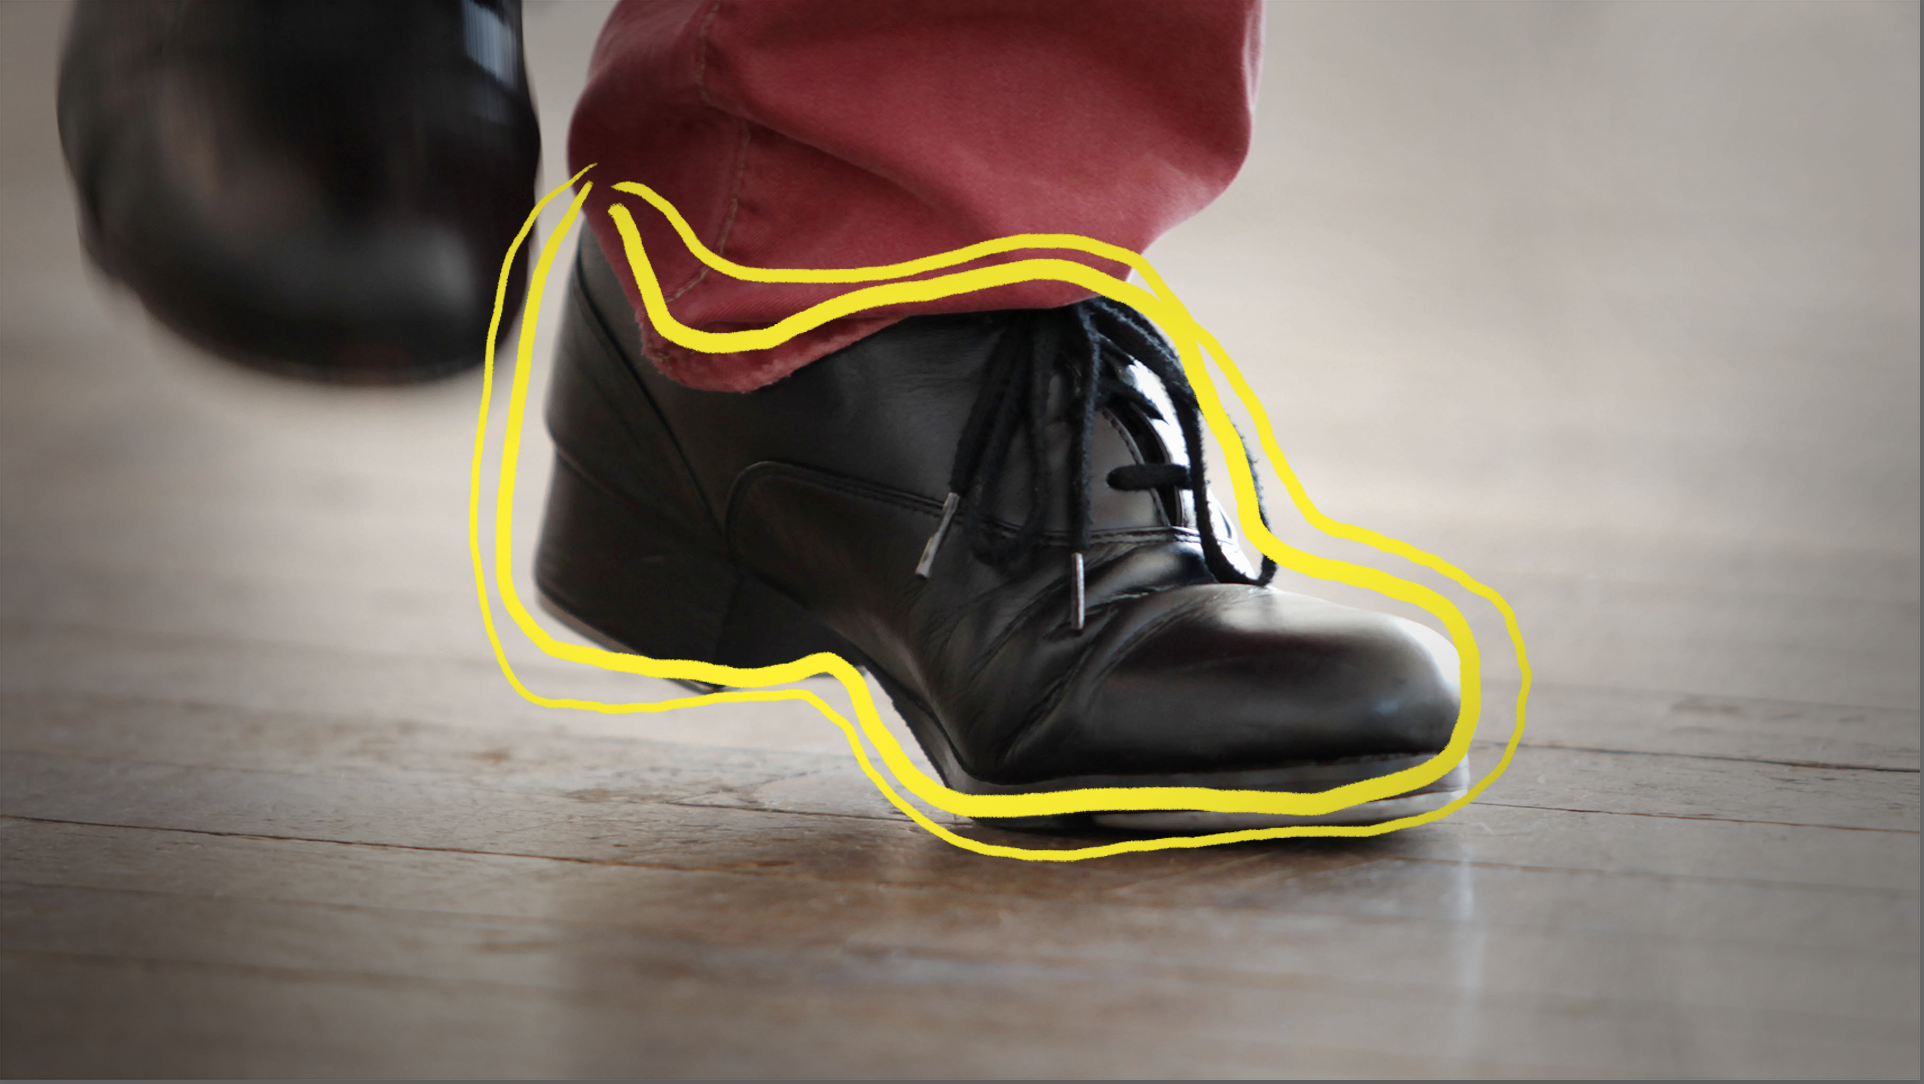 Tap dancing shoe with yellow outline